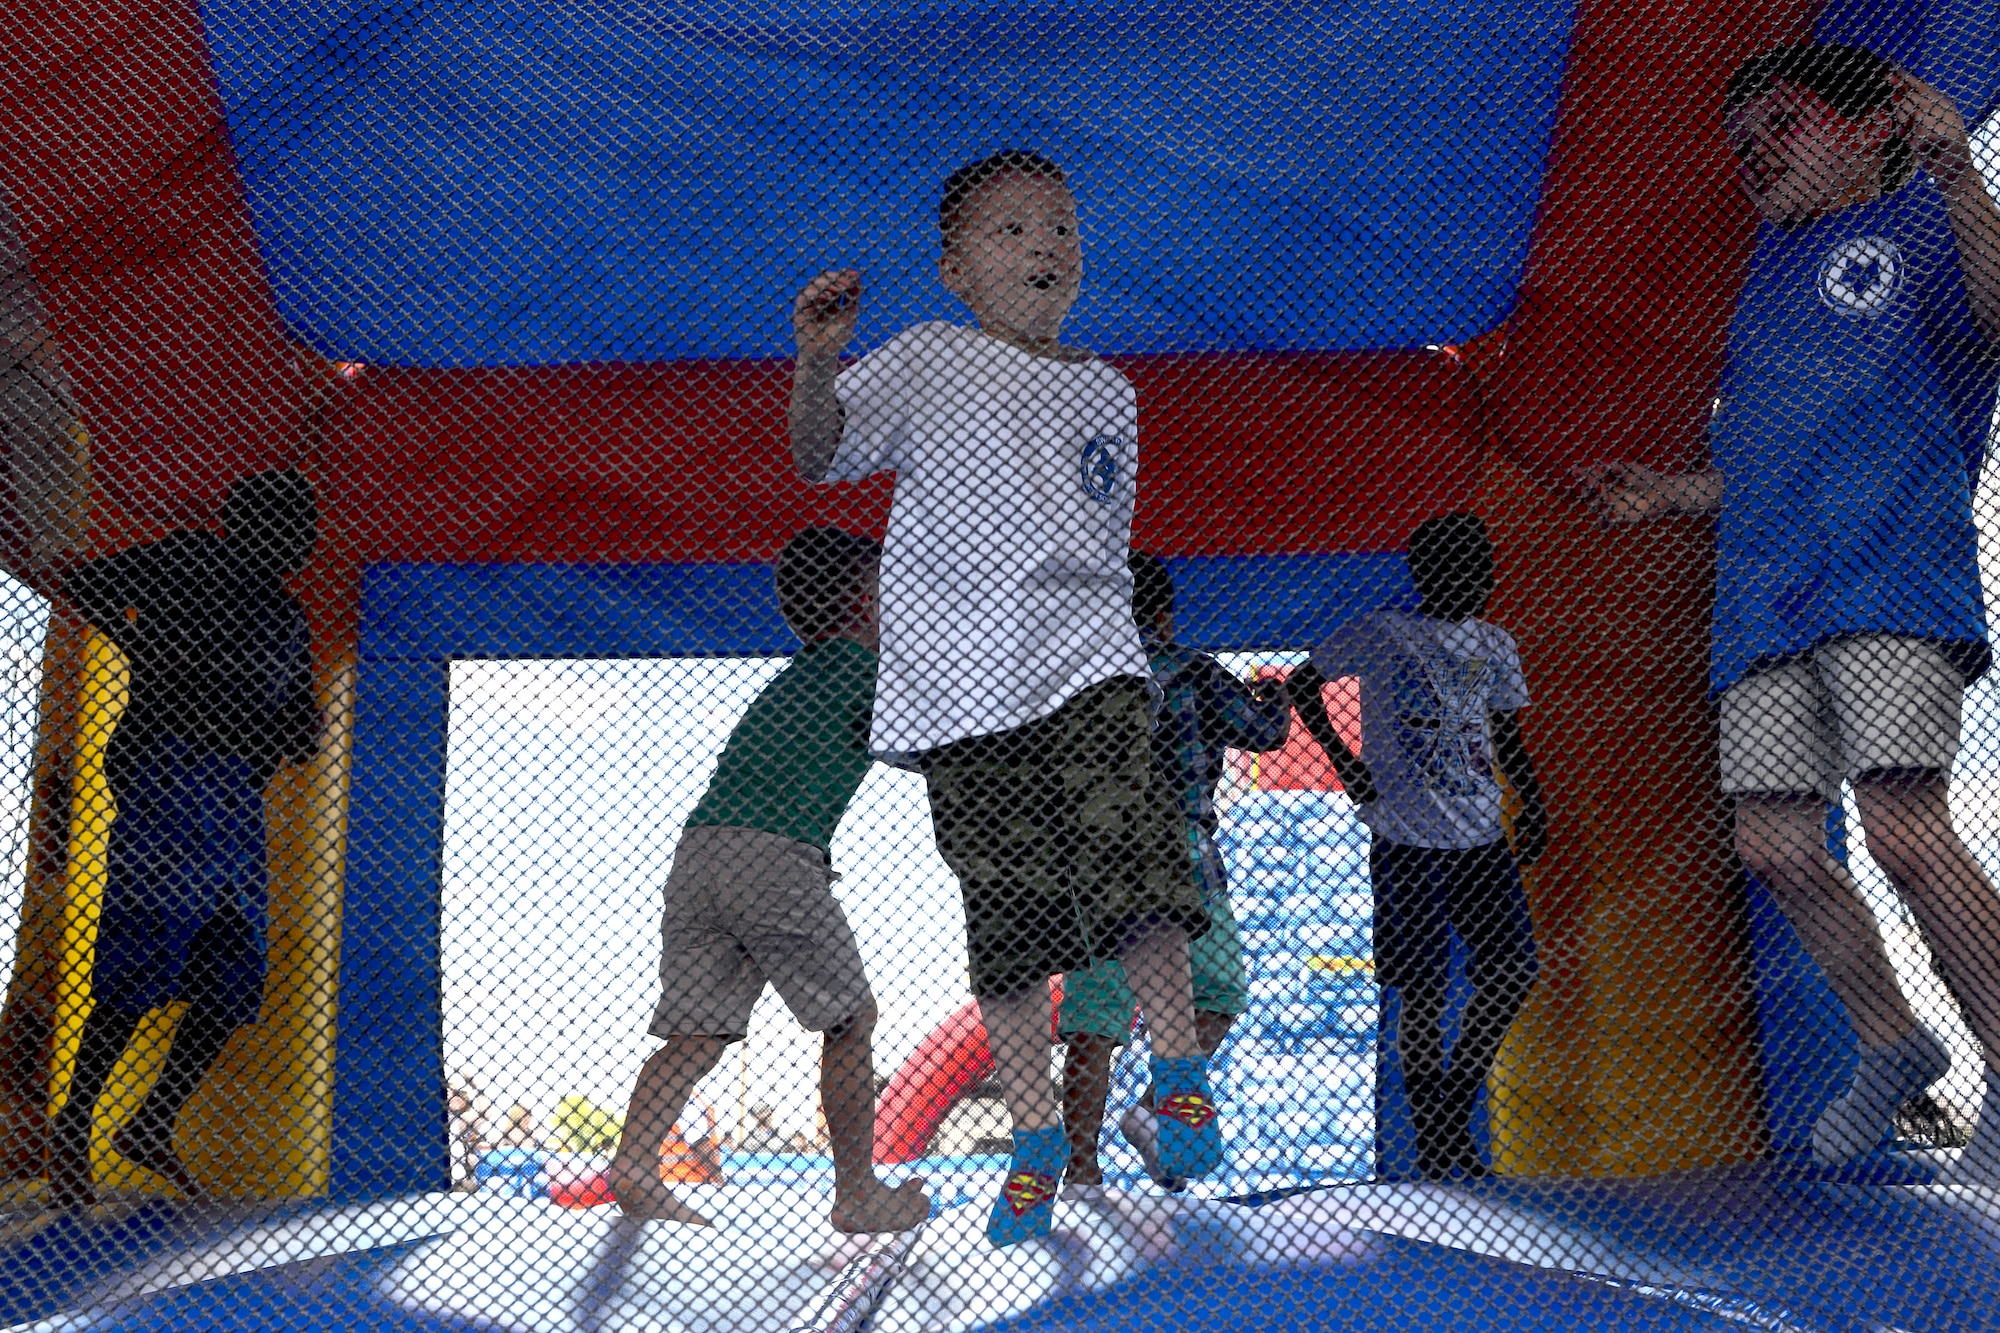 Swamp Fox Airmen and families gather for fun and fellowship during the 169th Fighter Wing Family Day at McEntire Joint National Guard Base, S.C., May 2, 2015. Local businesses and base support programs provided food and event activities to show their appreciation for the continued service of South Carolina Air National  Guard and 169th Fighter Wing families and Airmen. (U.S. Air National Guard photo by Airman 1st Class Ashleigh Pavelek/Released)